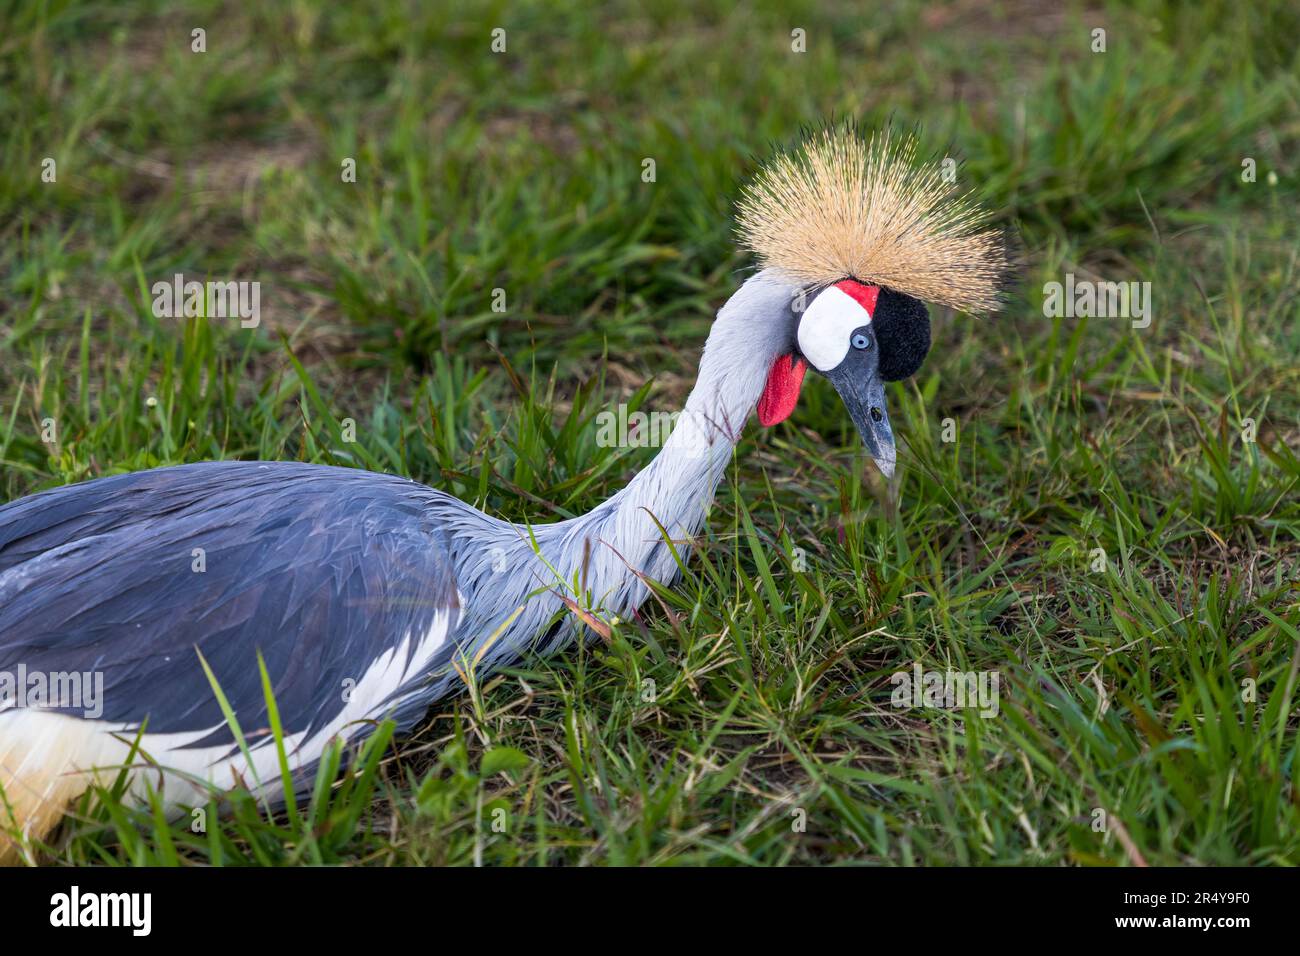 The South African Crowned Crane (Balearica regulorum regulorum) is found in the national coat of arms of Uganda and is therefore also called Uganda Crane. Uganda cranes in the R & L Game Ranch, Mwenda, Malawi Stock Photo